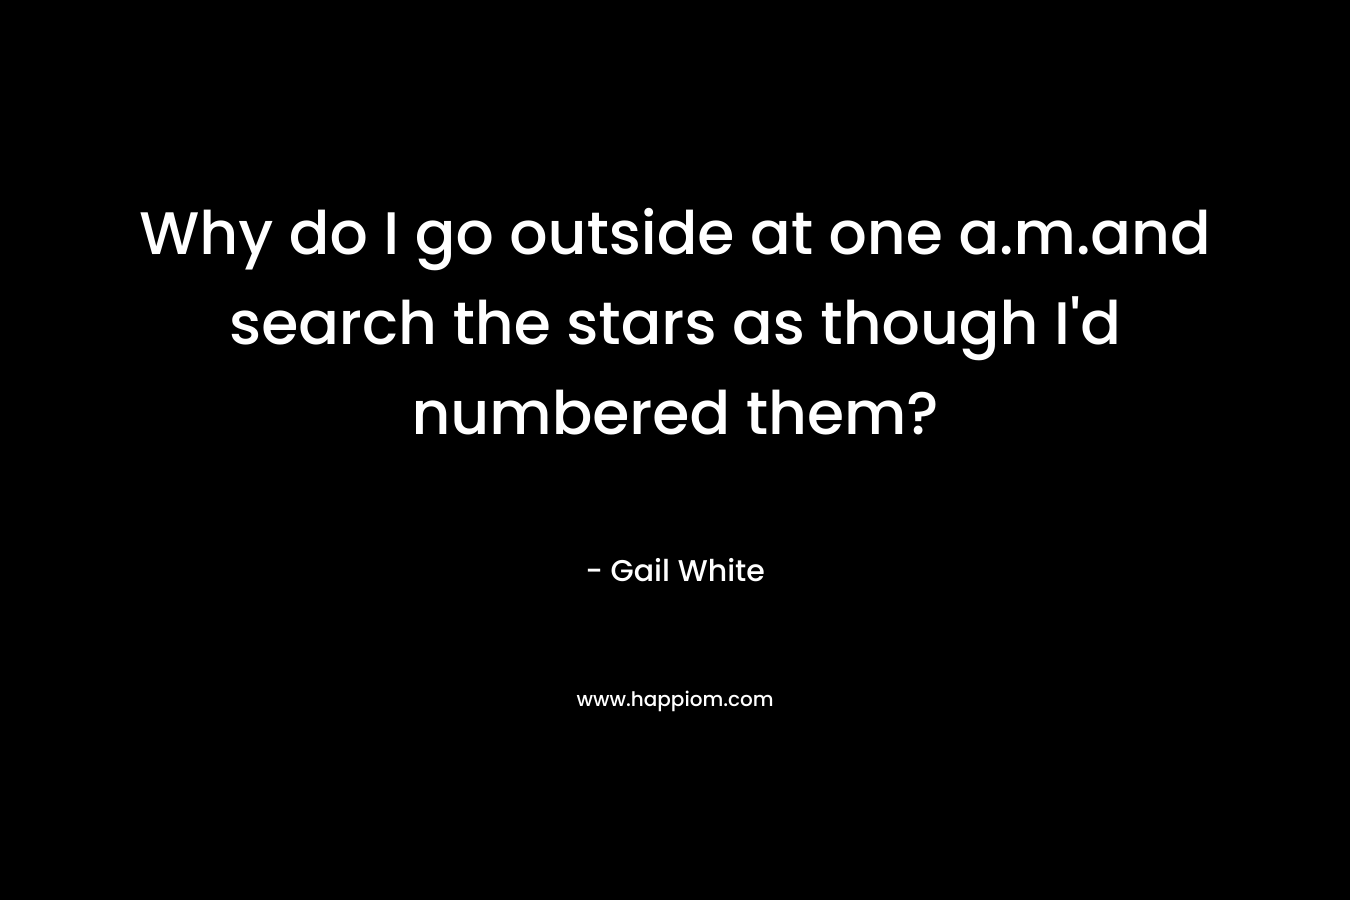 Why do I go outside at one a.m.and search the stars as though I’d numbered them? – Gail White